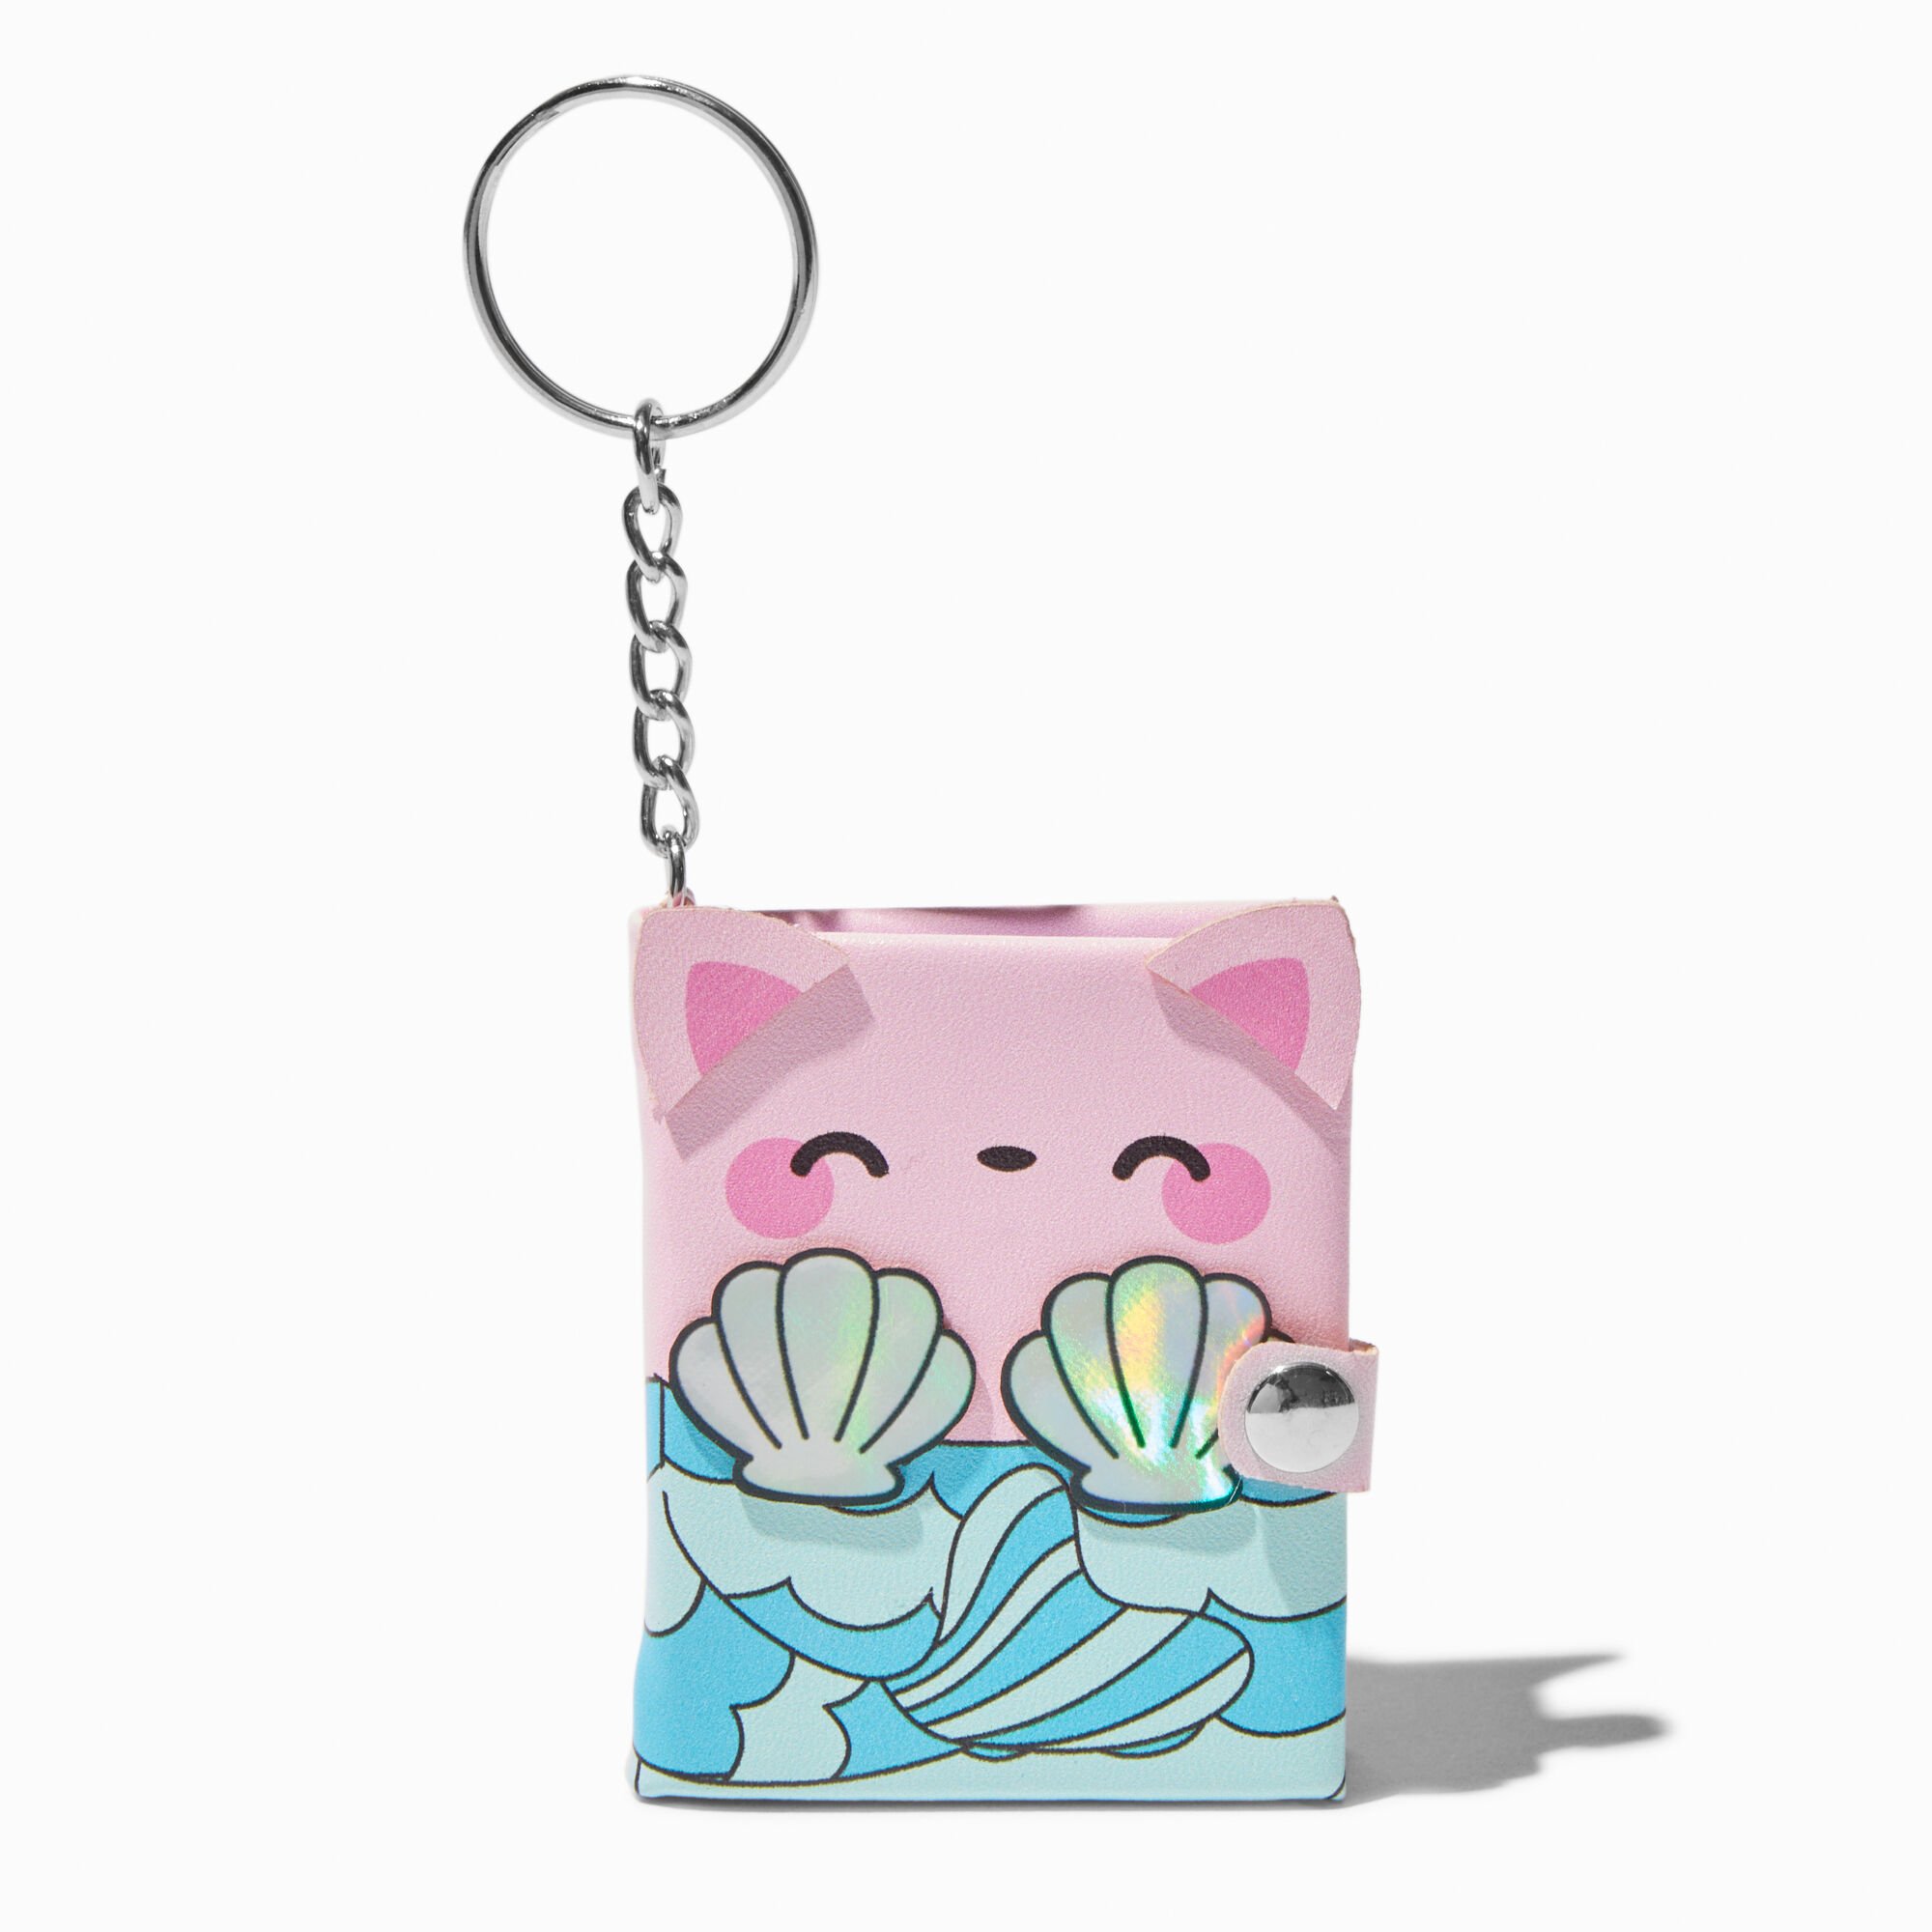 View Claires Hamster Shell Mini Diary Keyring information